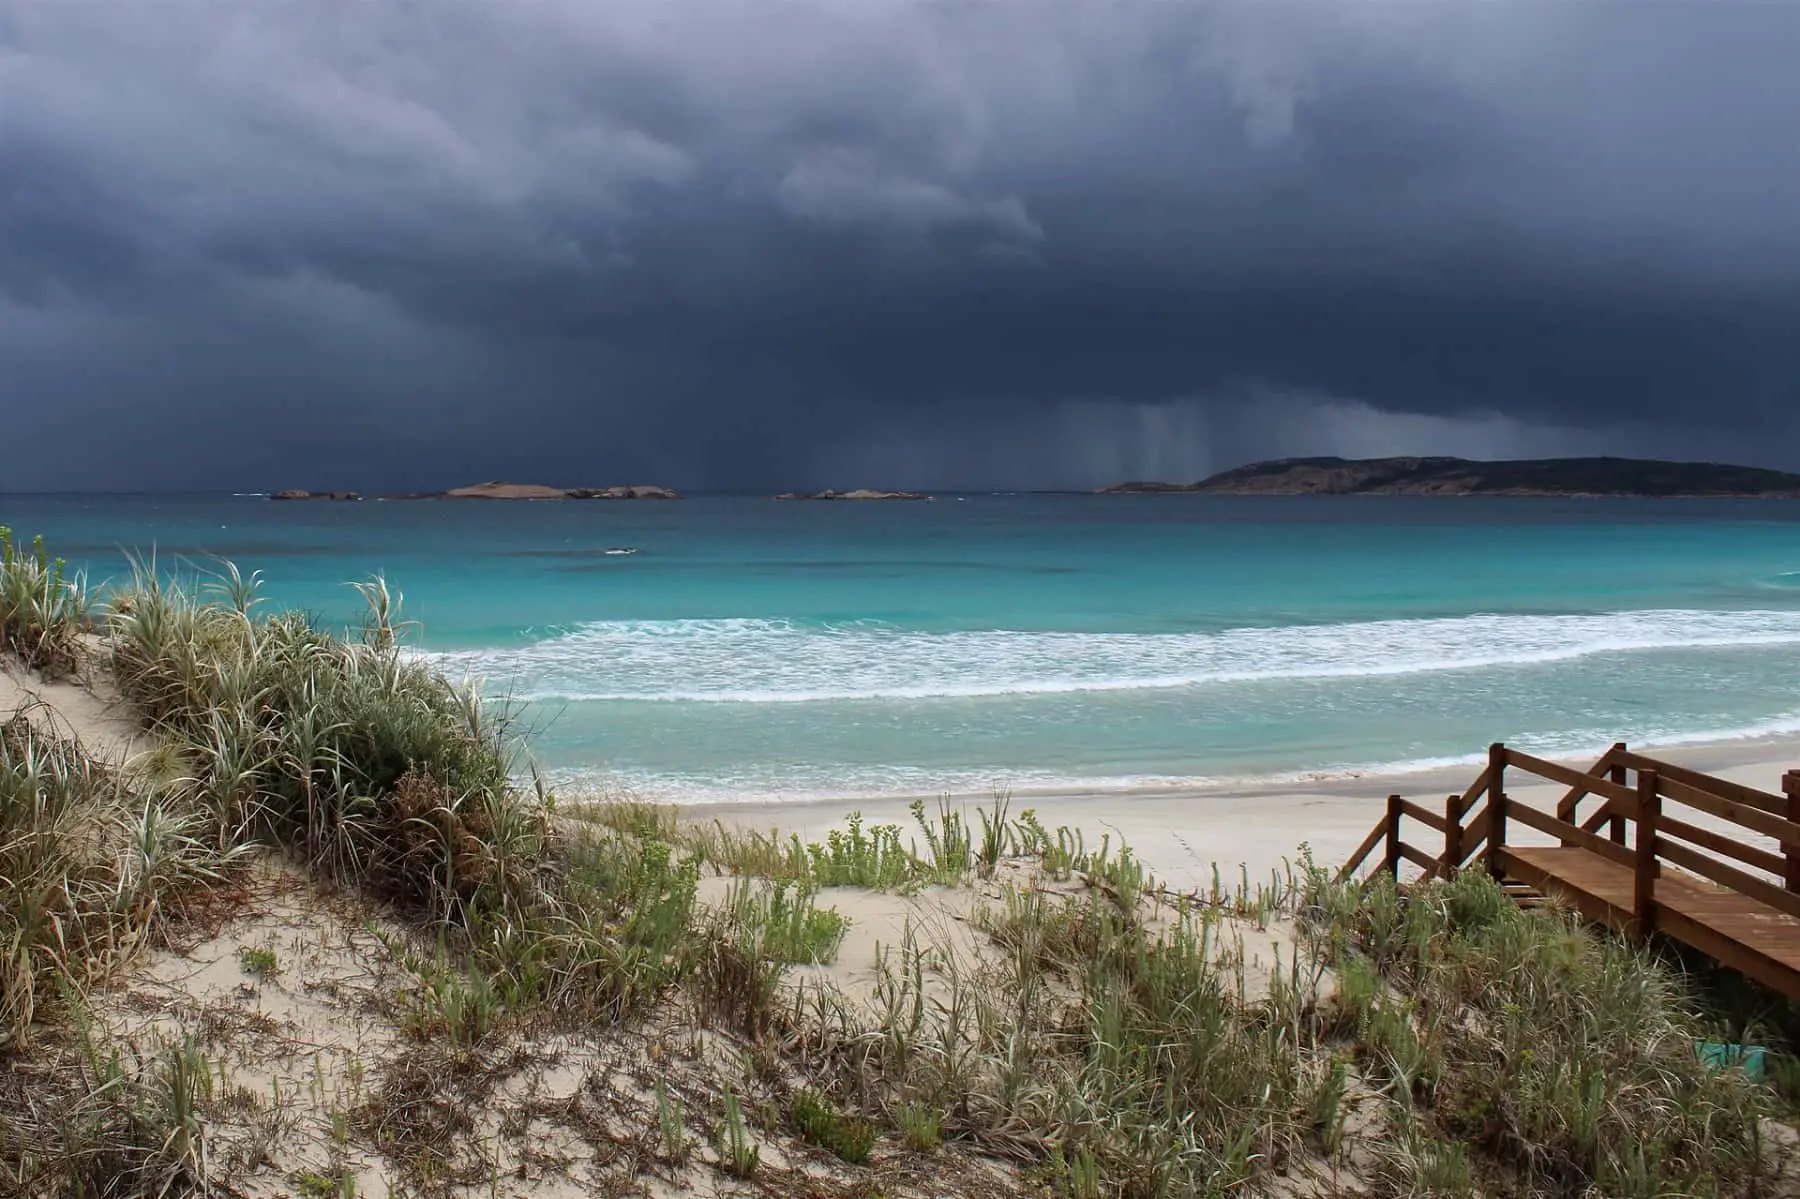 Things to Do in Esperance WA (Even in the Rain!)